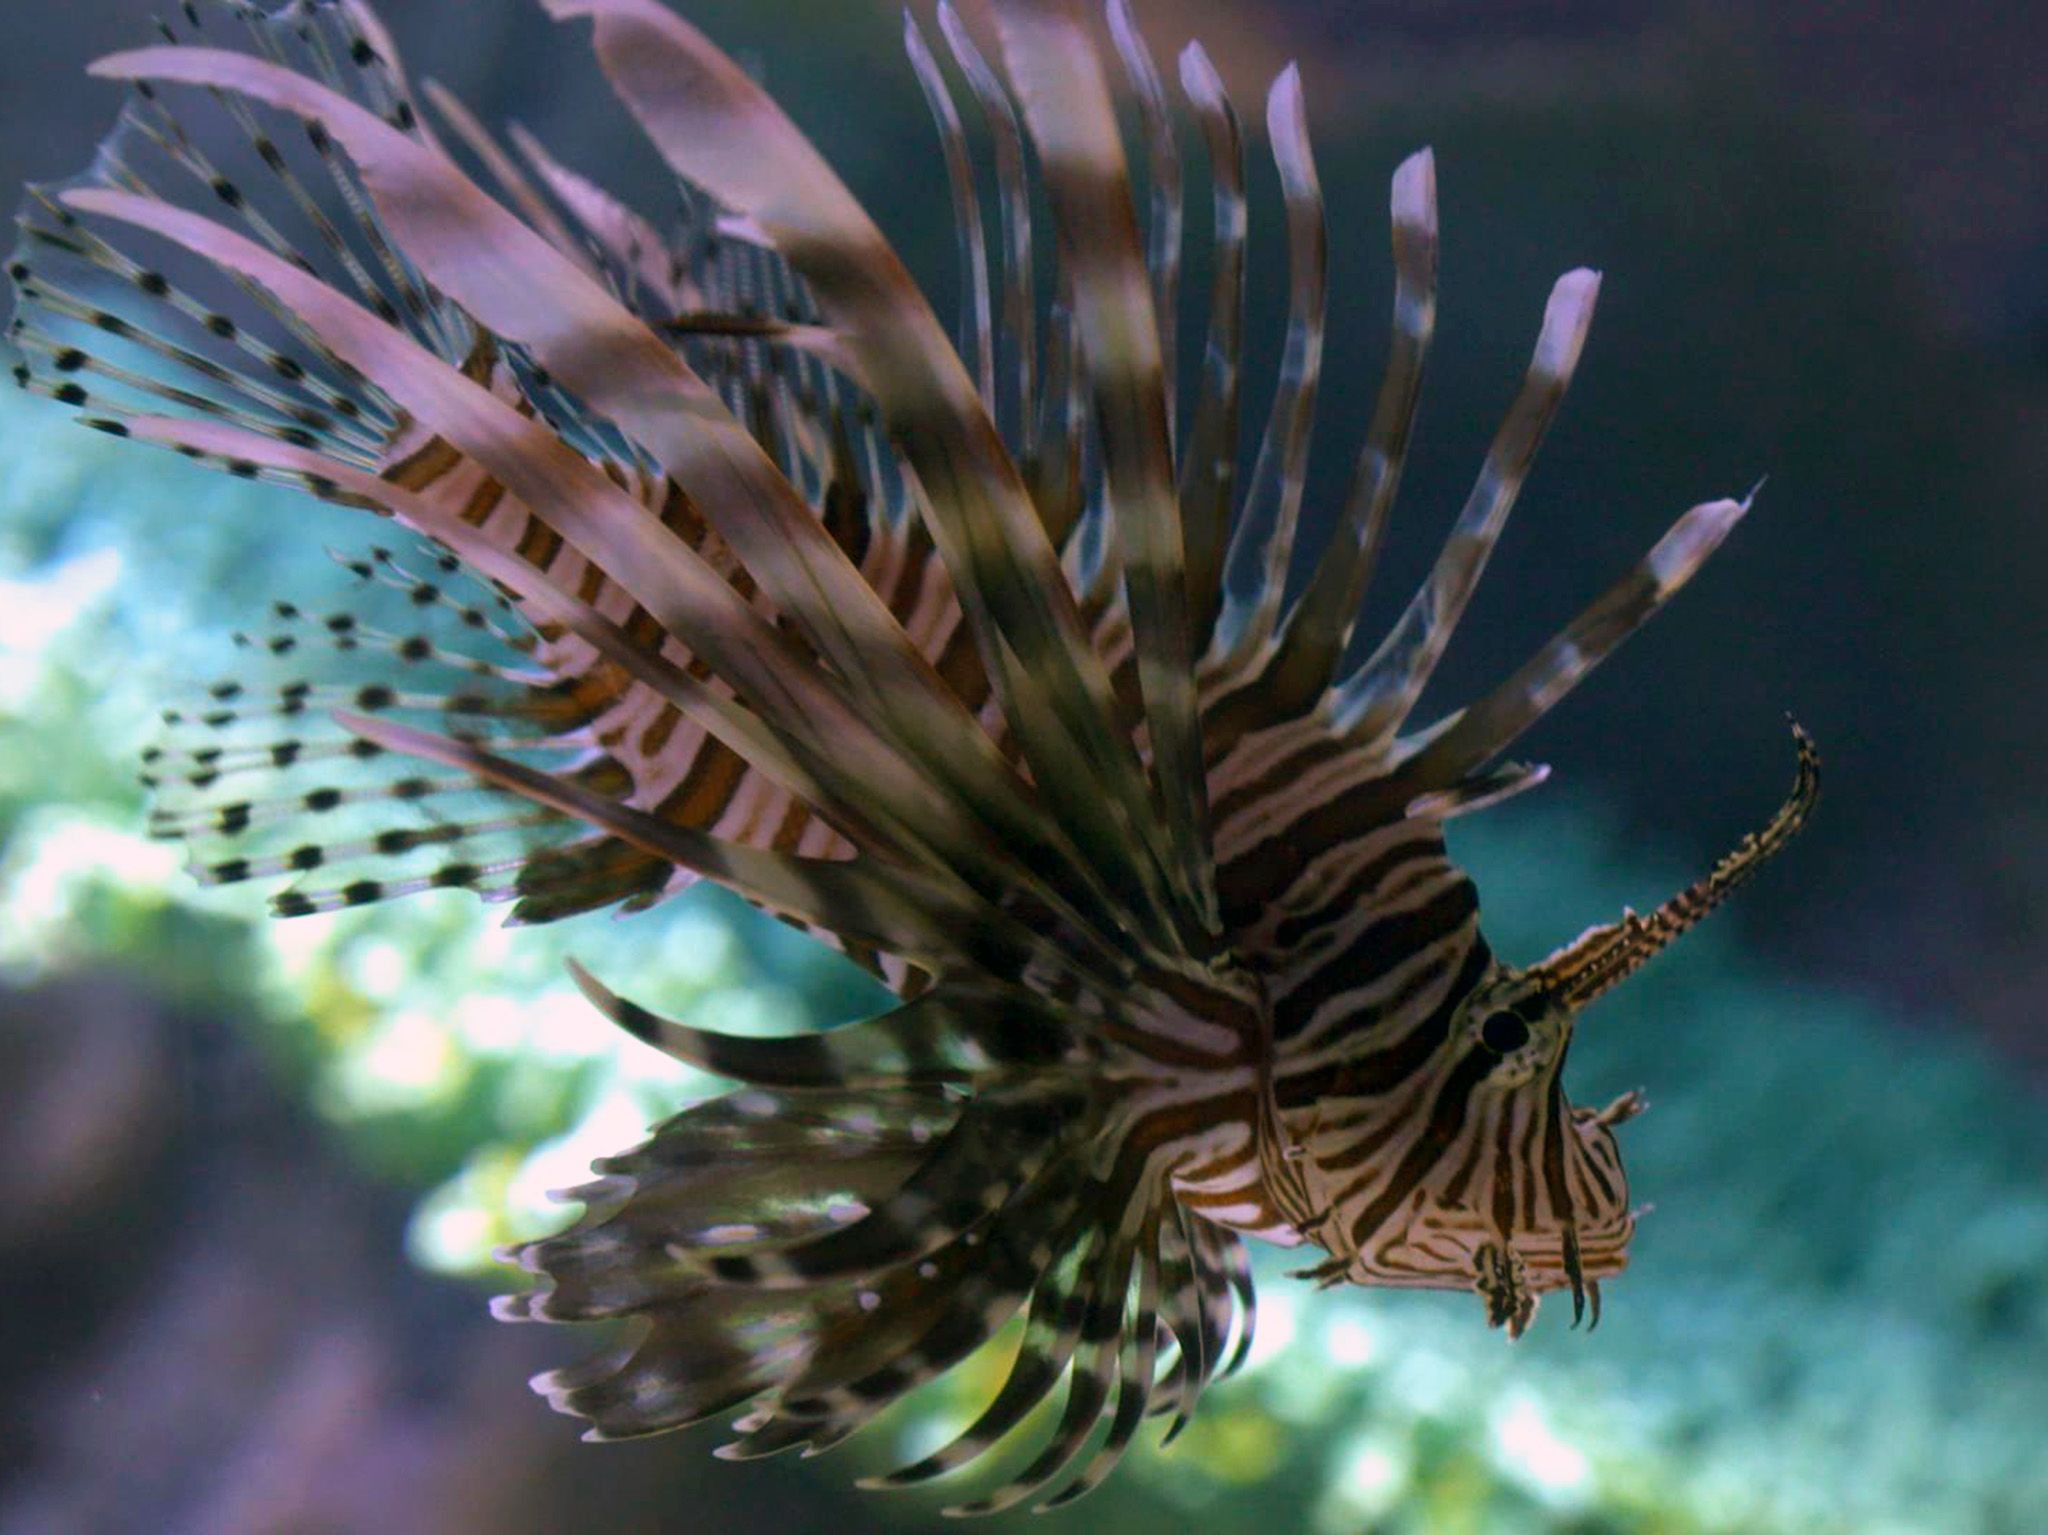 Cancun, Mexico:  A lionfish swims in its tank at the Interactive Aquarium Cancun.  This image is... [Photo of the day - May 2018]